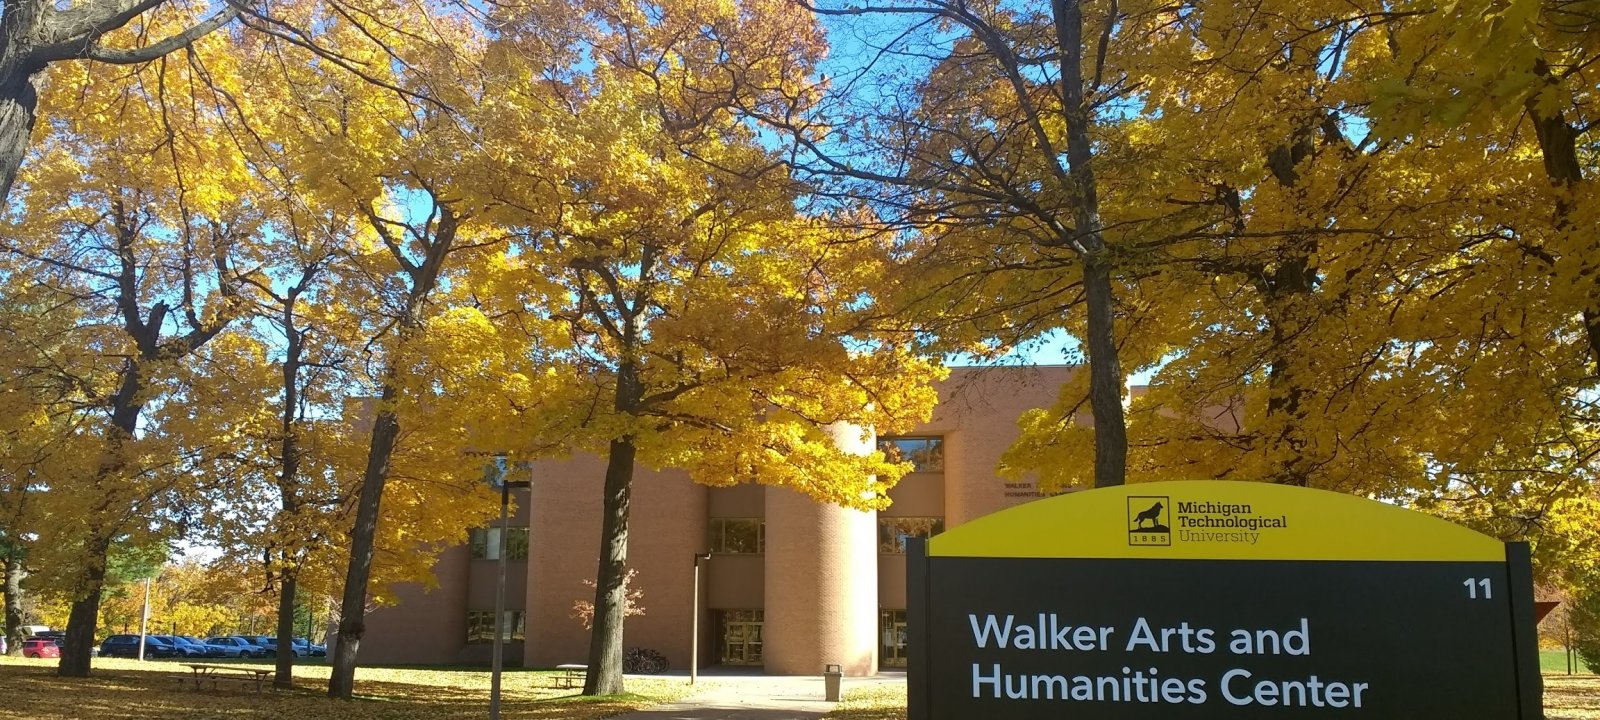 Walker Arts and Humanities Center building in fall